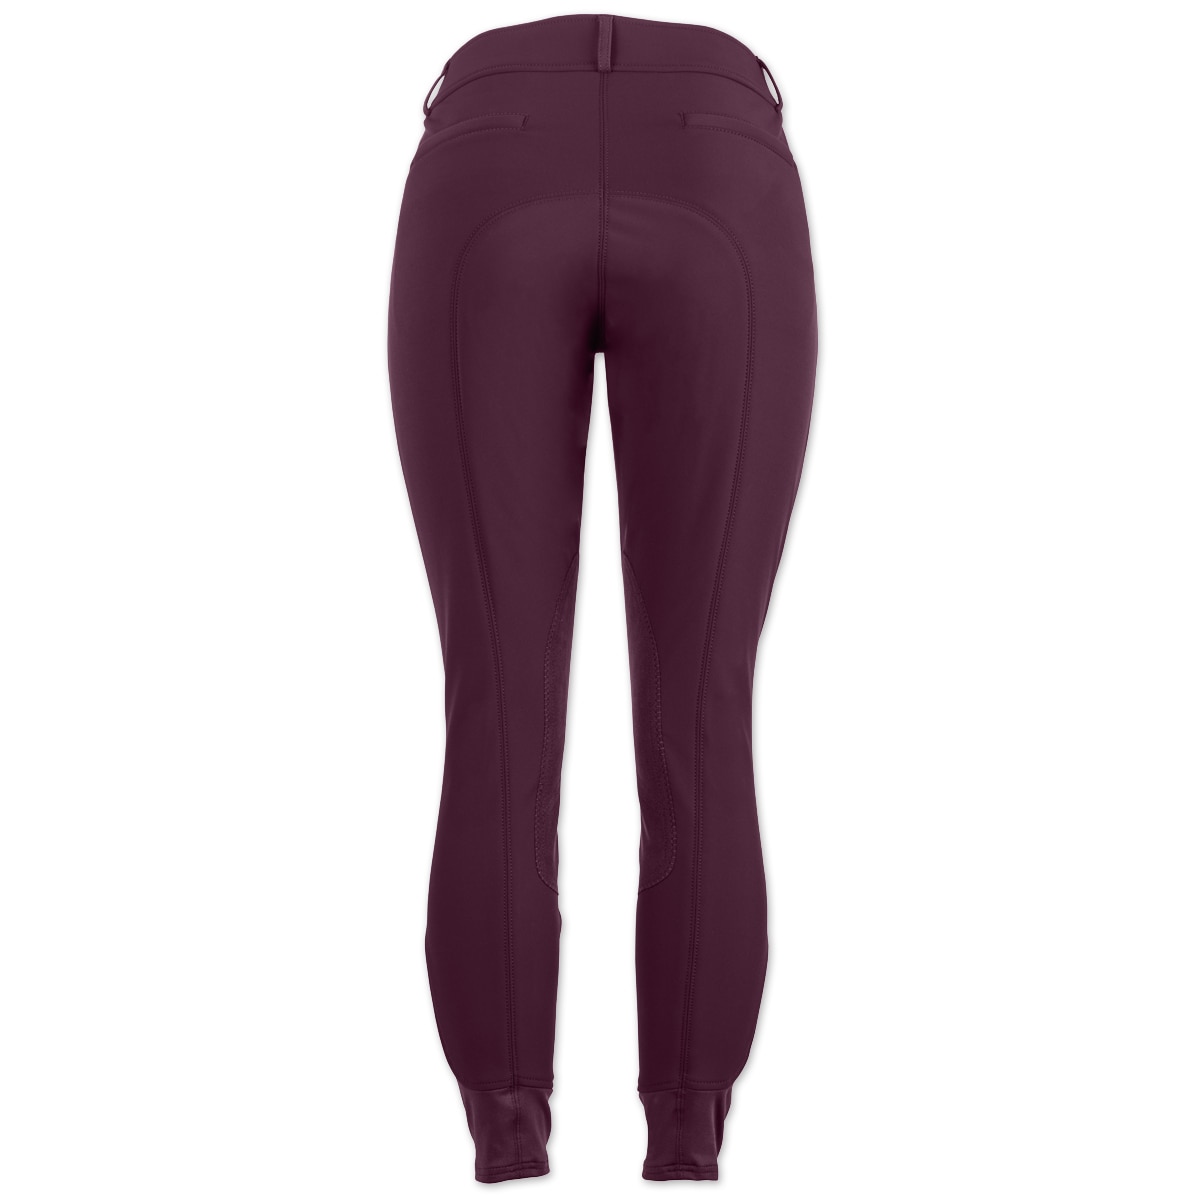 Purple All Sizes Derby House Gel Full Seat Kids Pants Riding Tights